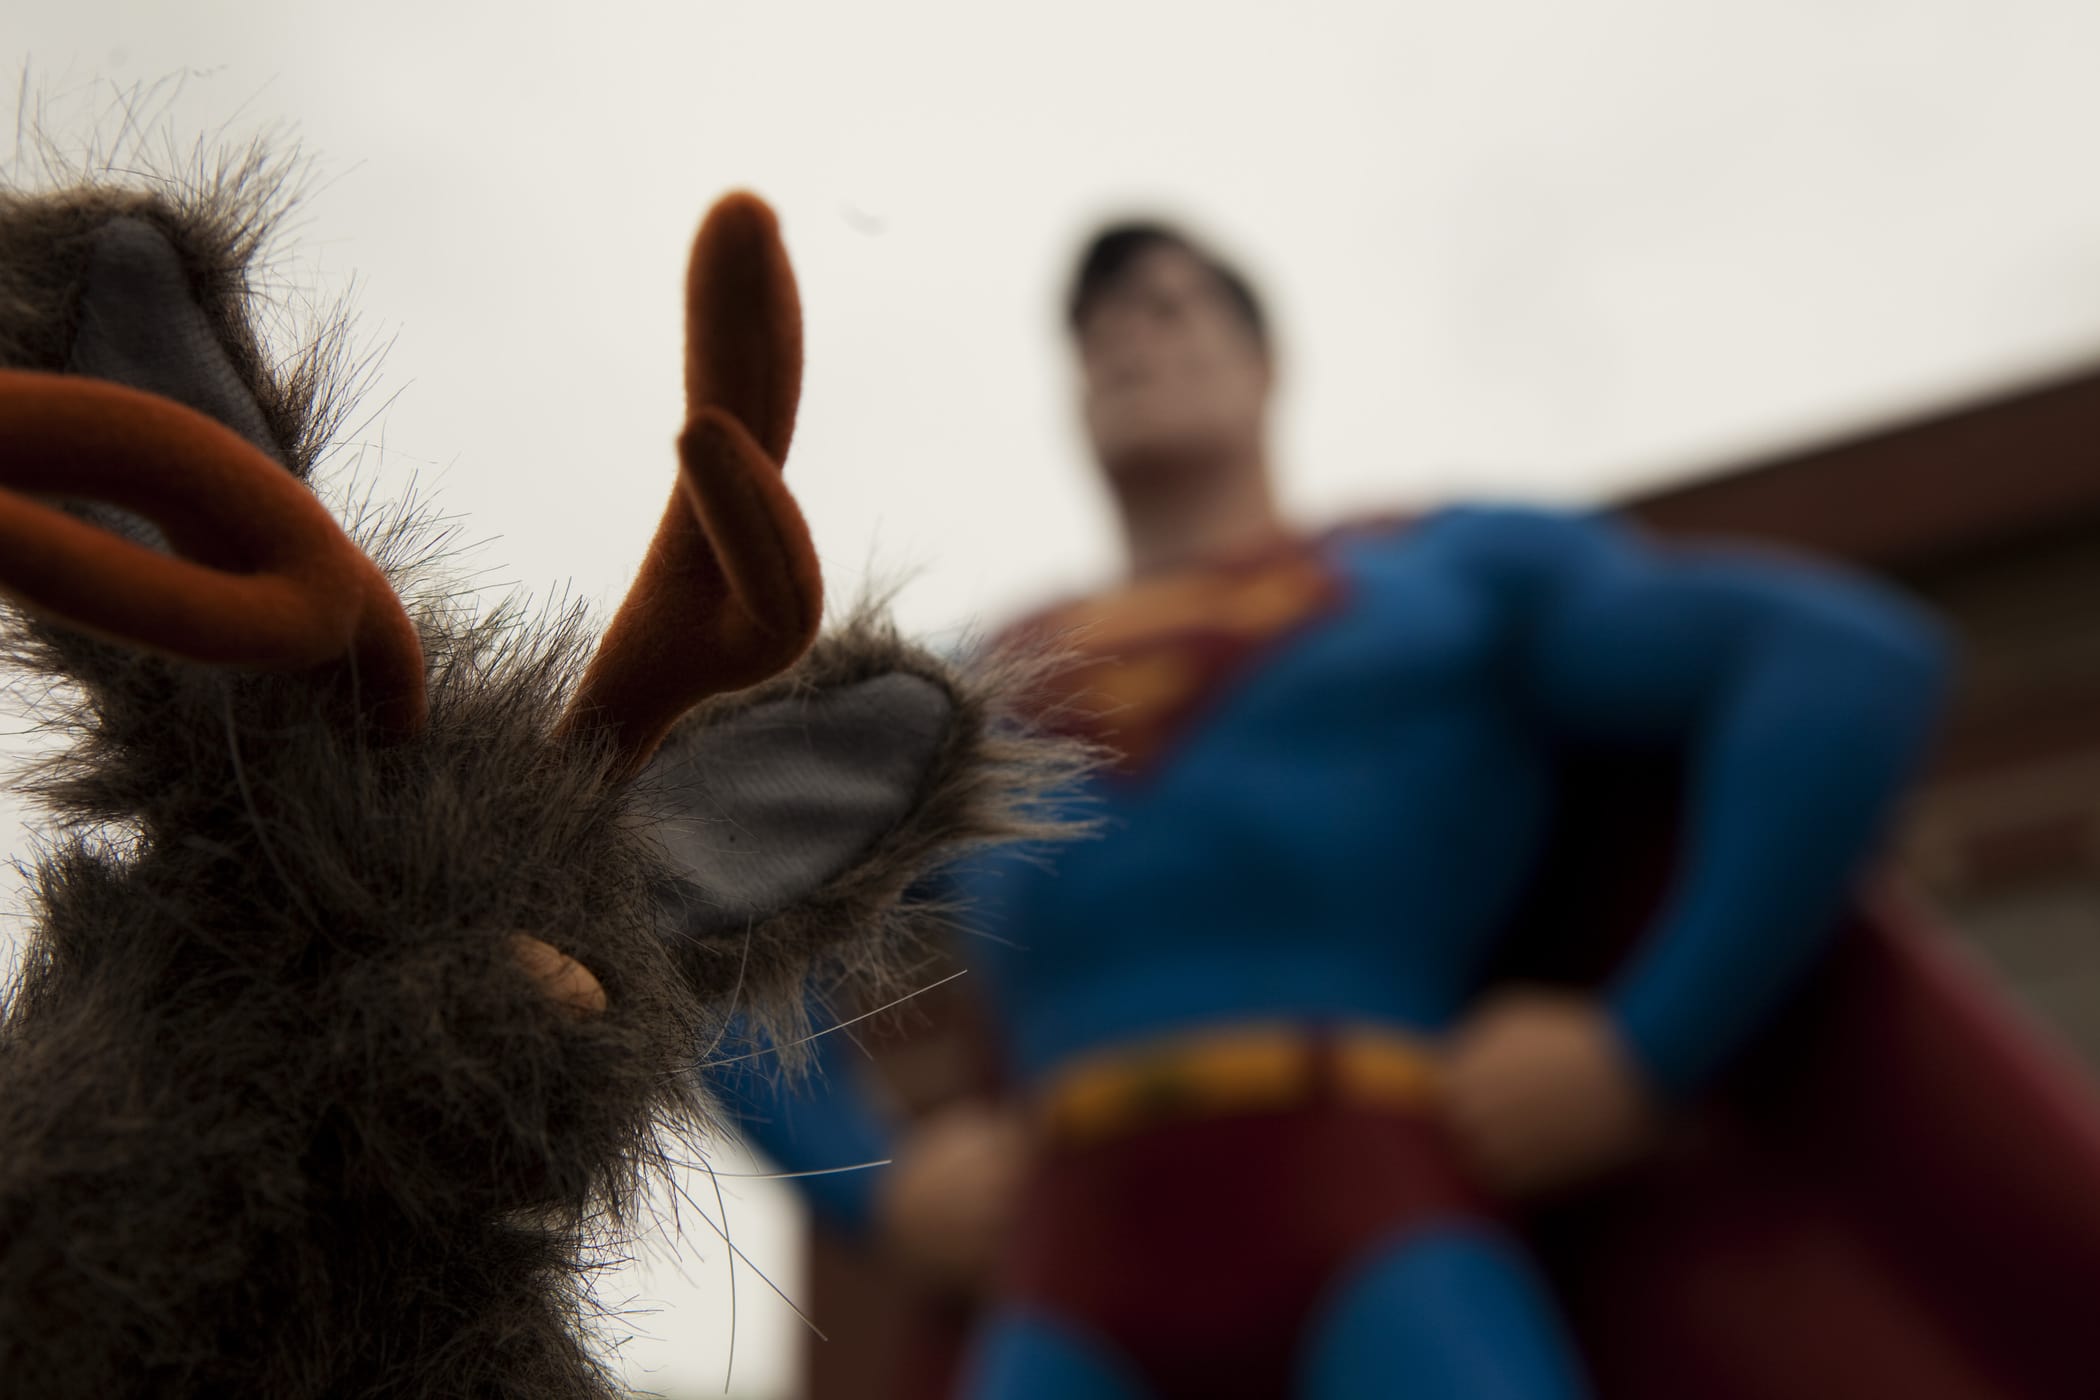 Flopsy the Jackalope with the Giant Superman statue, a roadside attraction in Metropolis, Illinois.